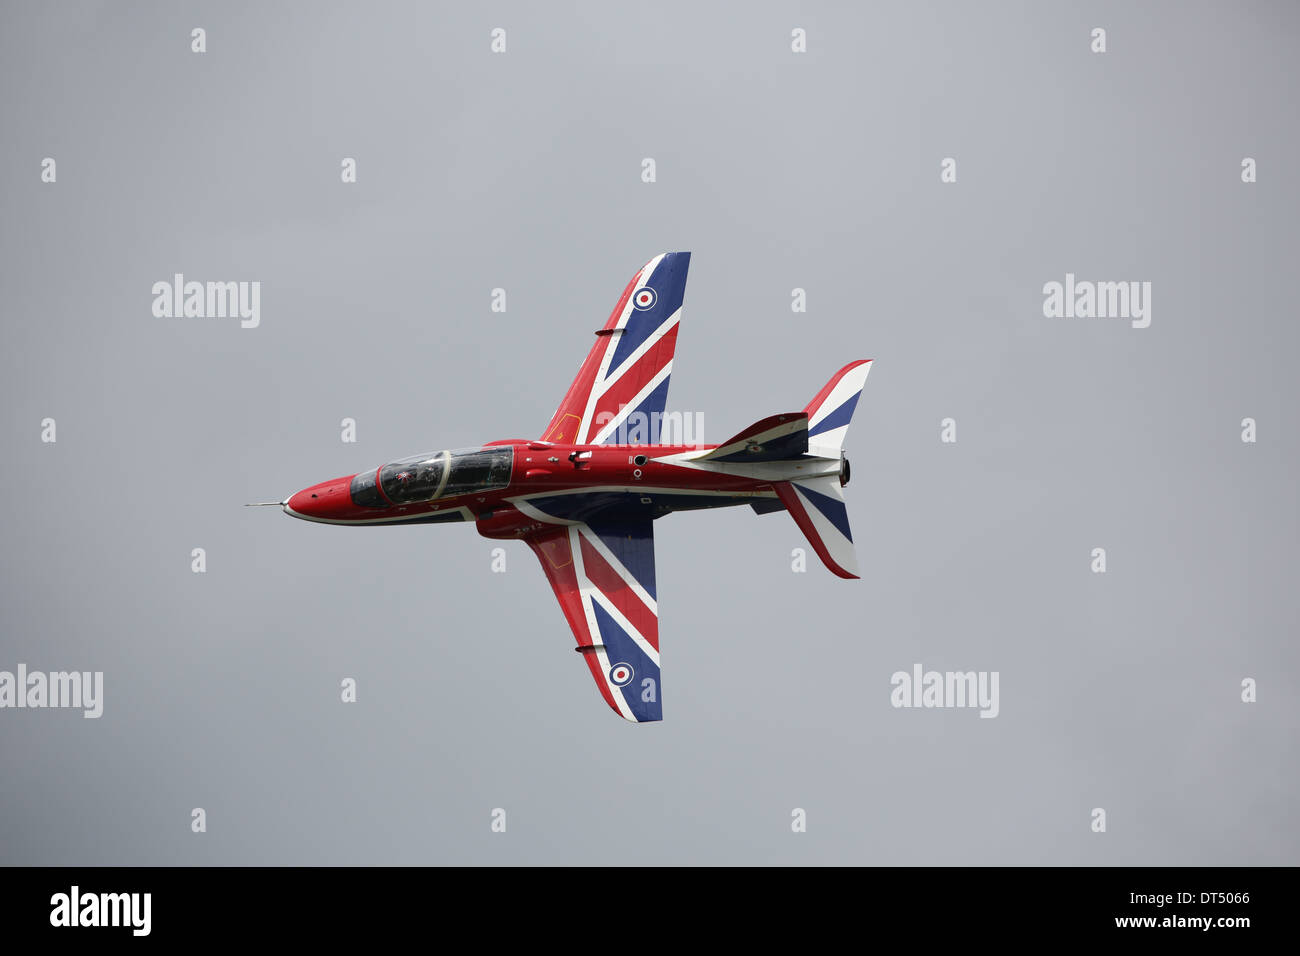 A BAE Hawk jet trainer in a special livery for the diamond jubilee of Queen Elizabeth II in 2012 Stock Photo